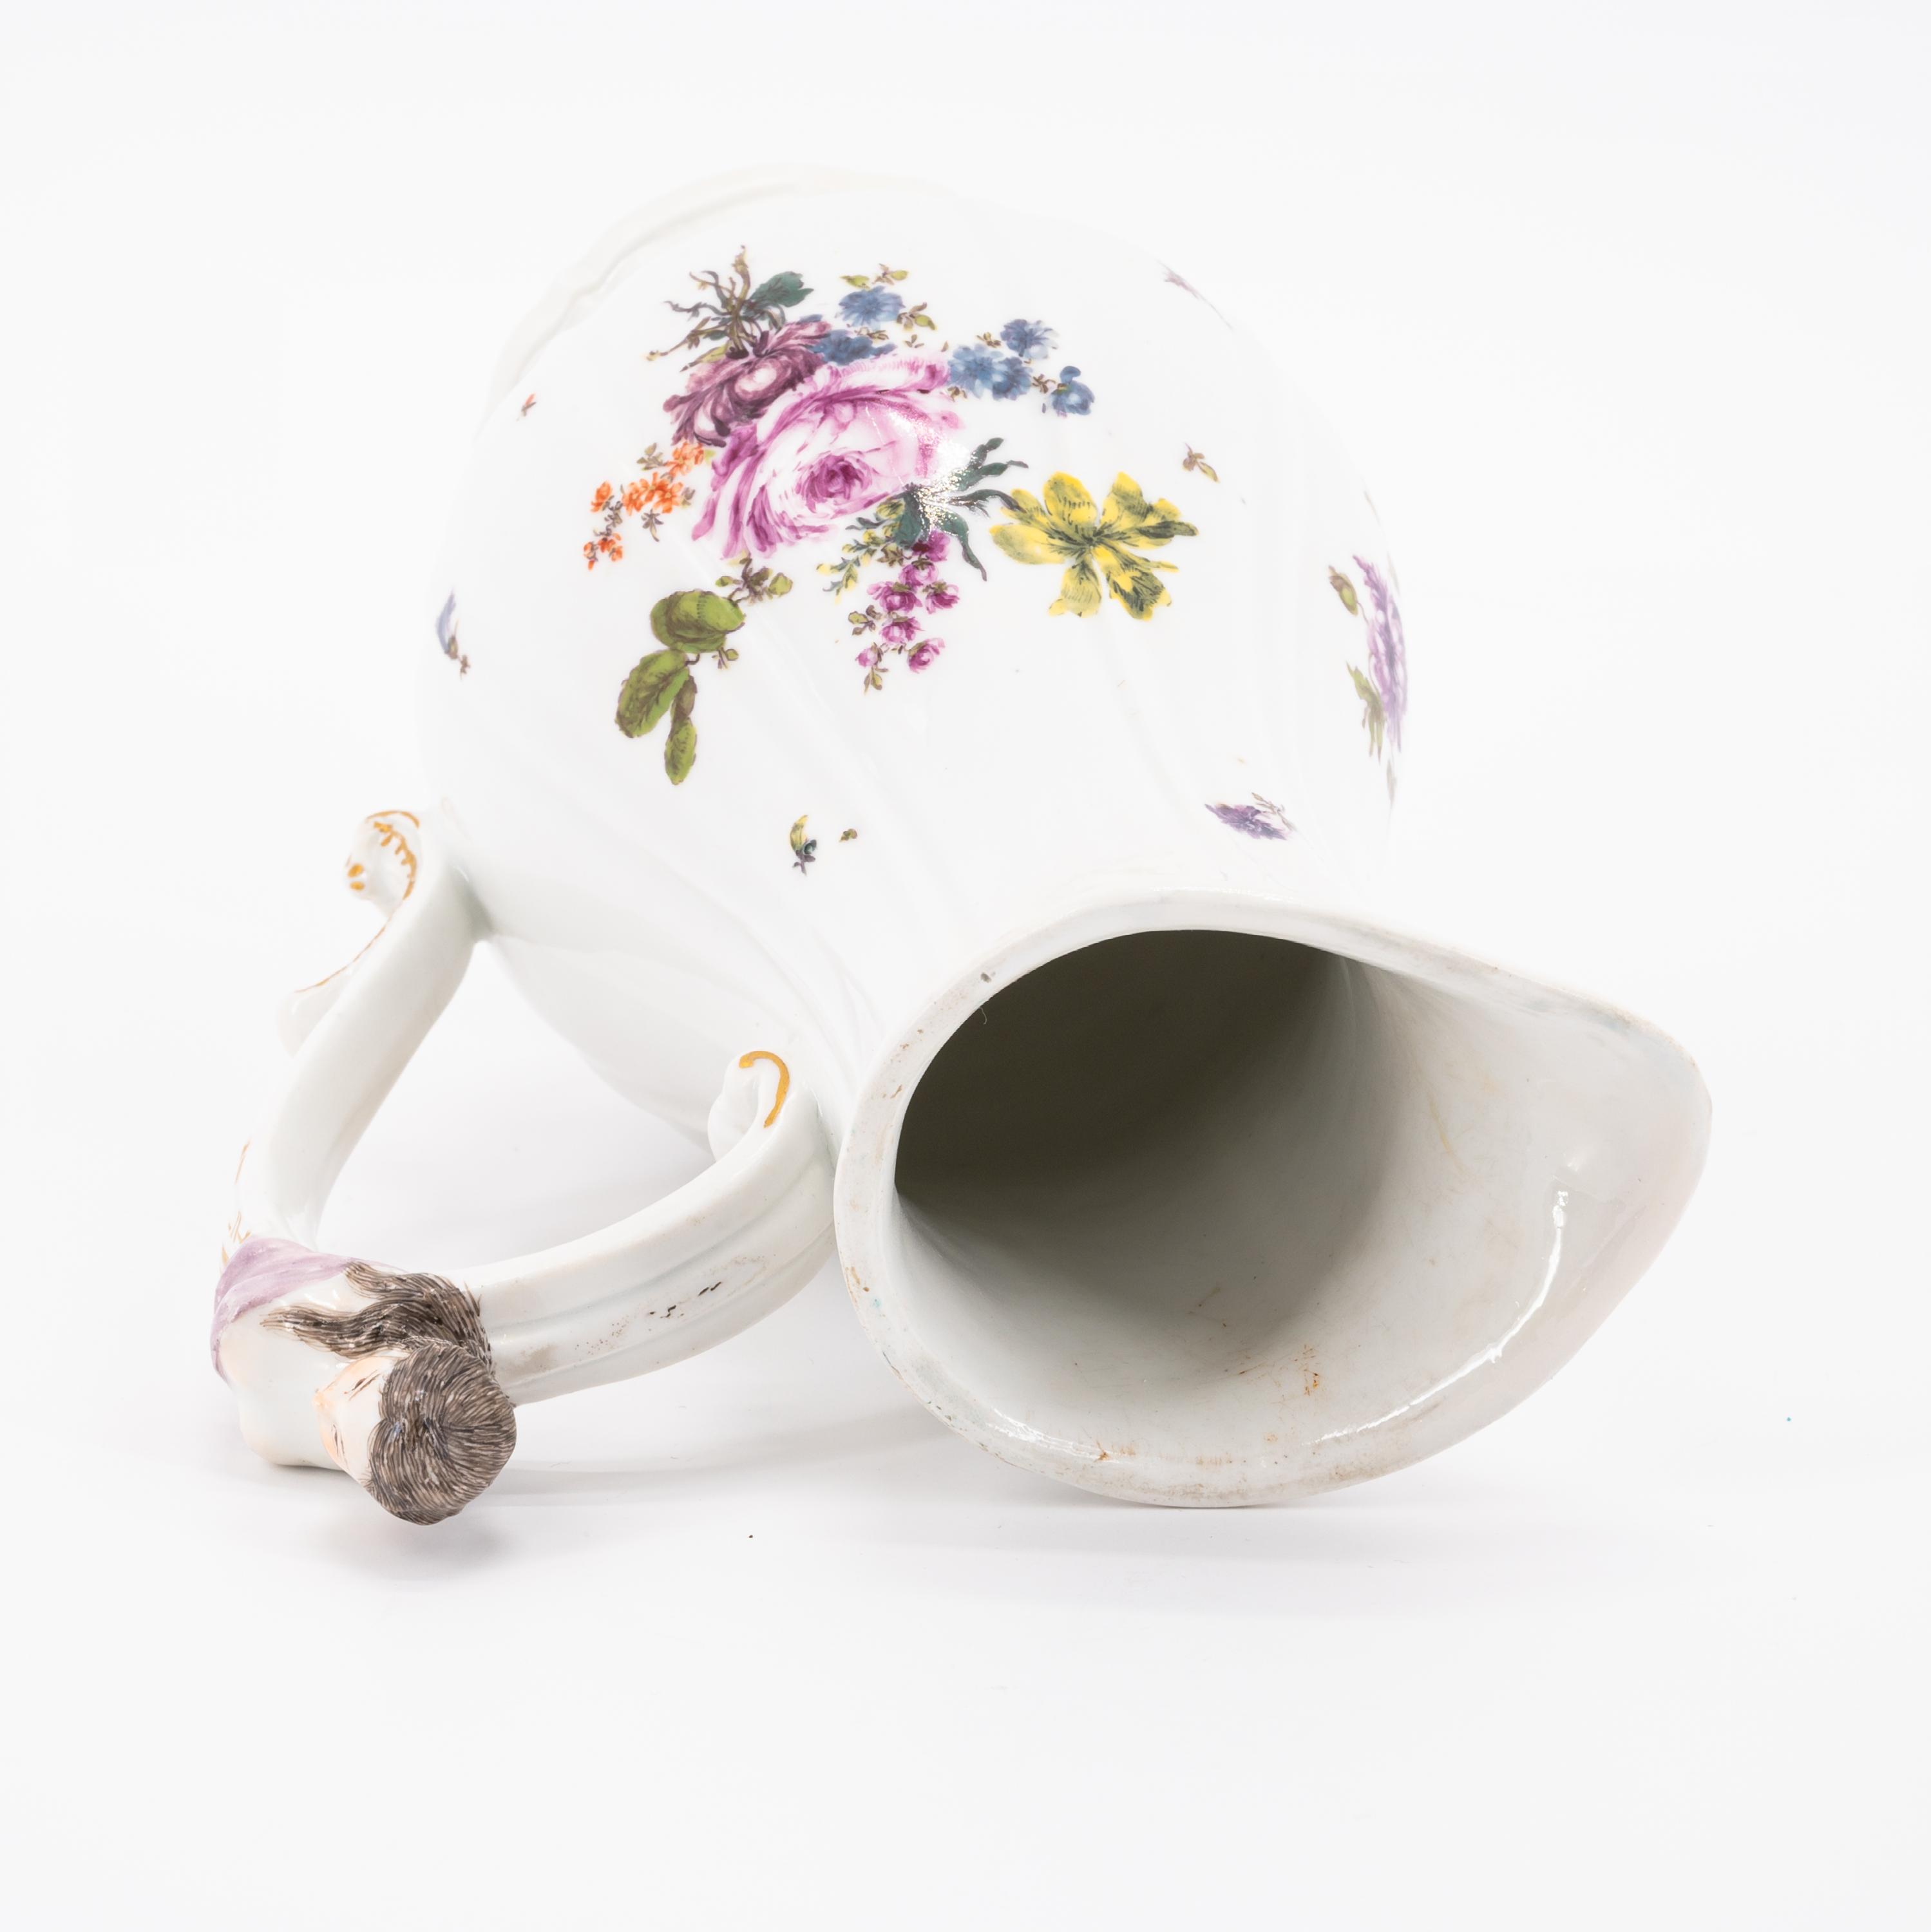 TWO PORCELAIN VASES, ONE MILK JUG AND ONE SMALL BOWL WITH OMBRE FLOWERS - Image 10 of 13